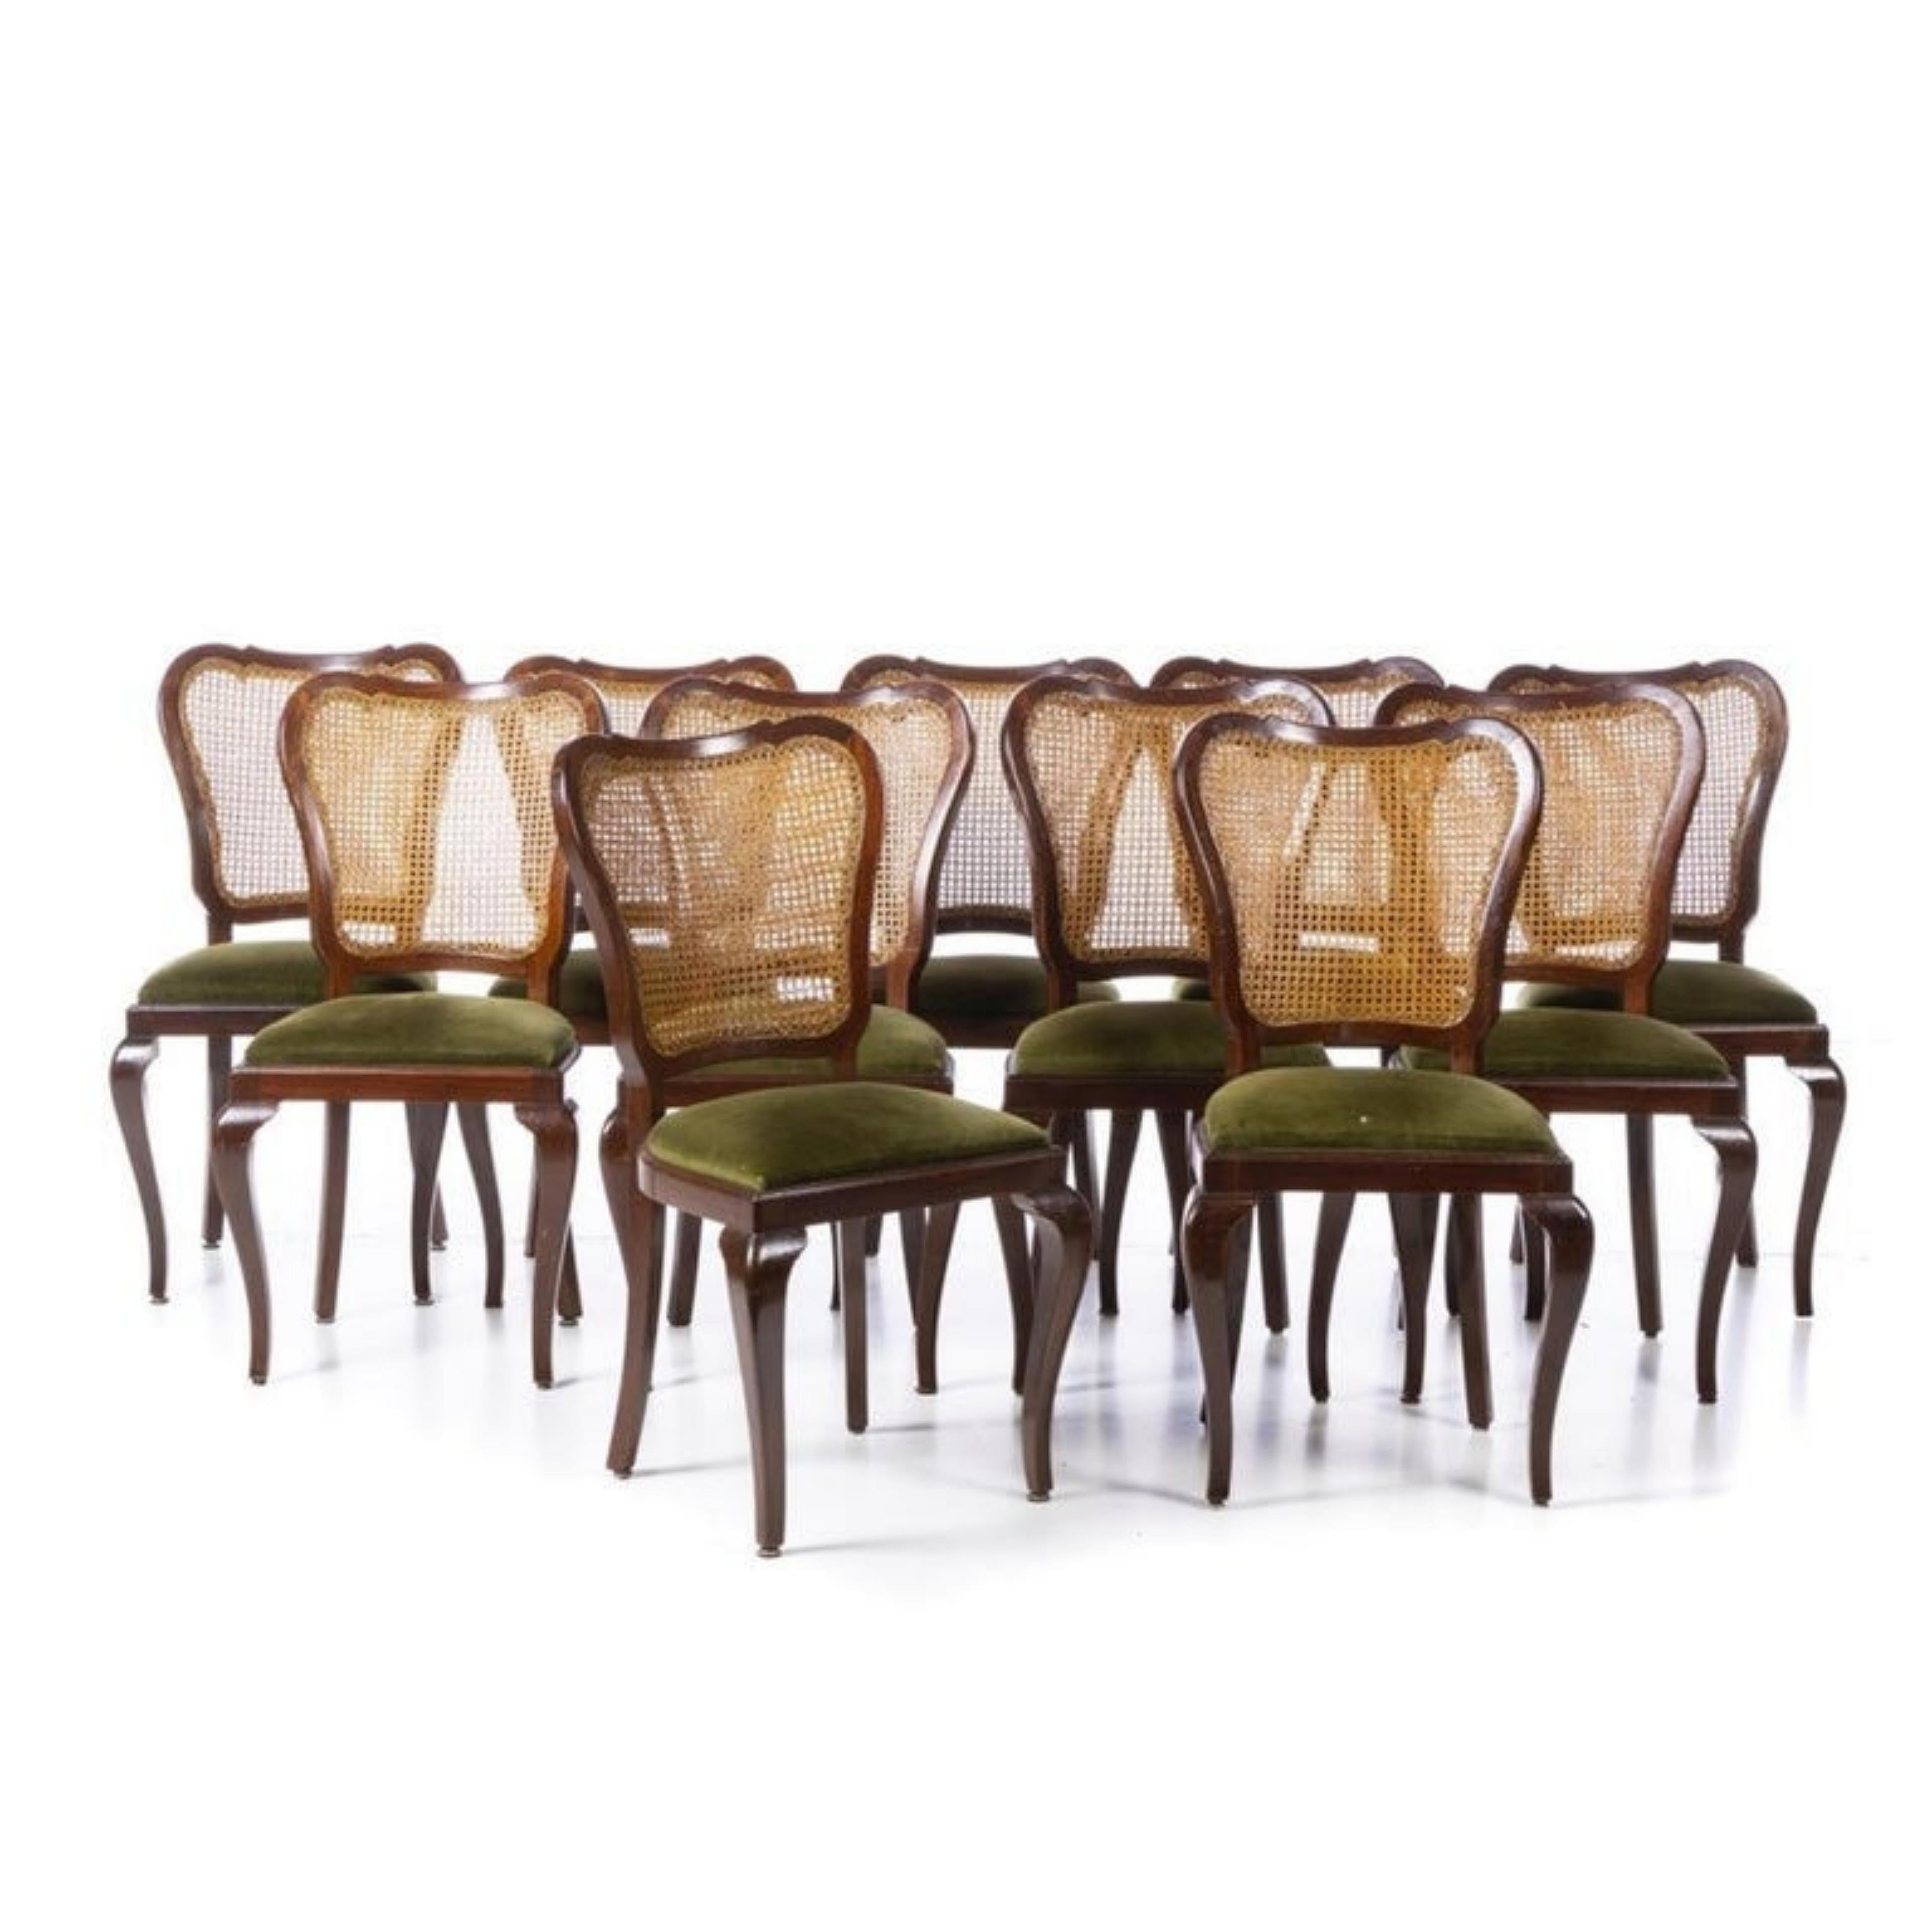 Baroque 11 Portuguese Chairs from the 20th Century in Mahogany